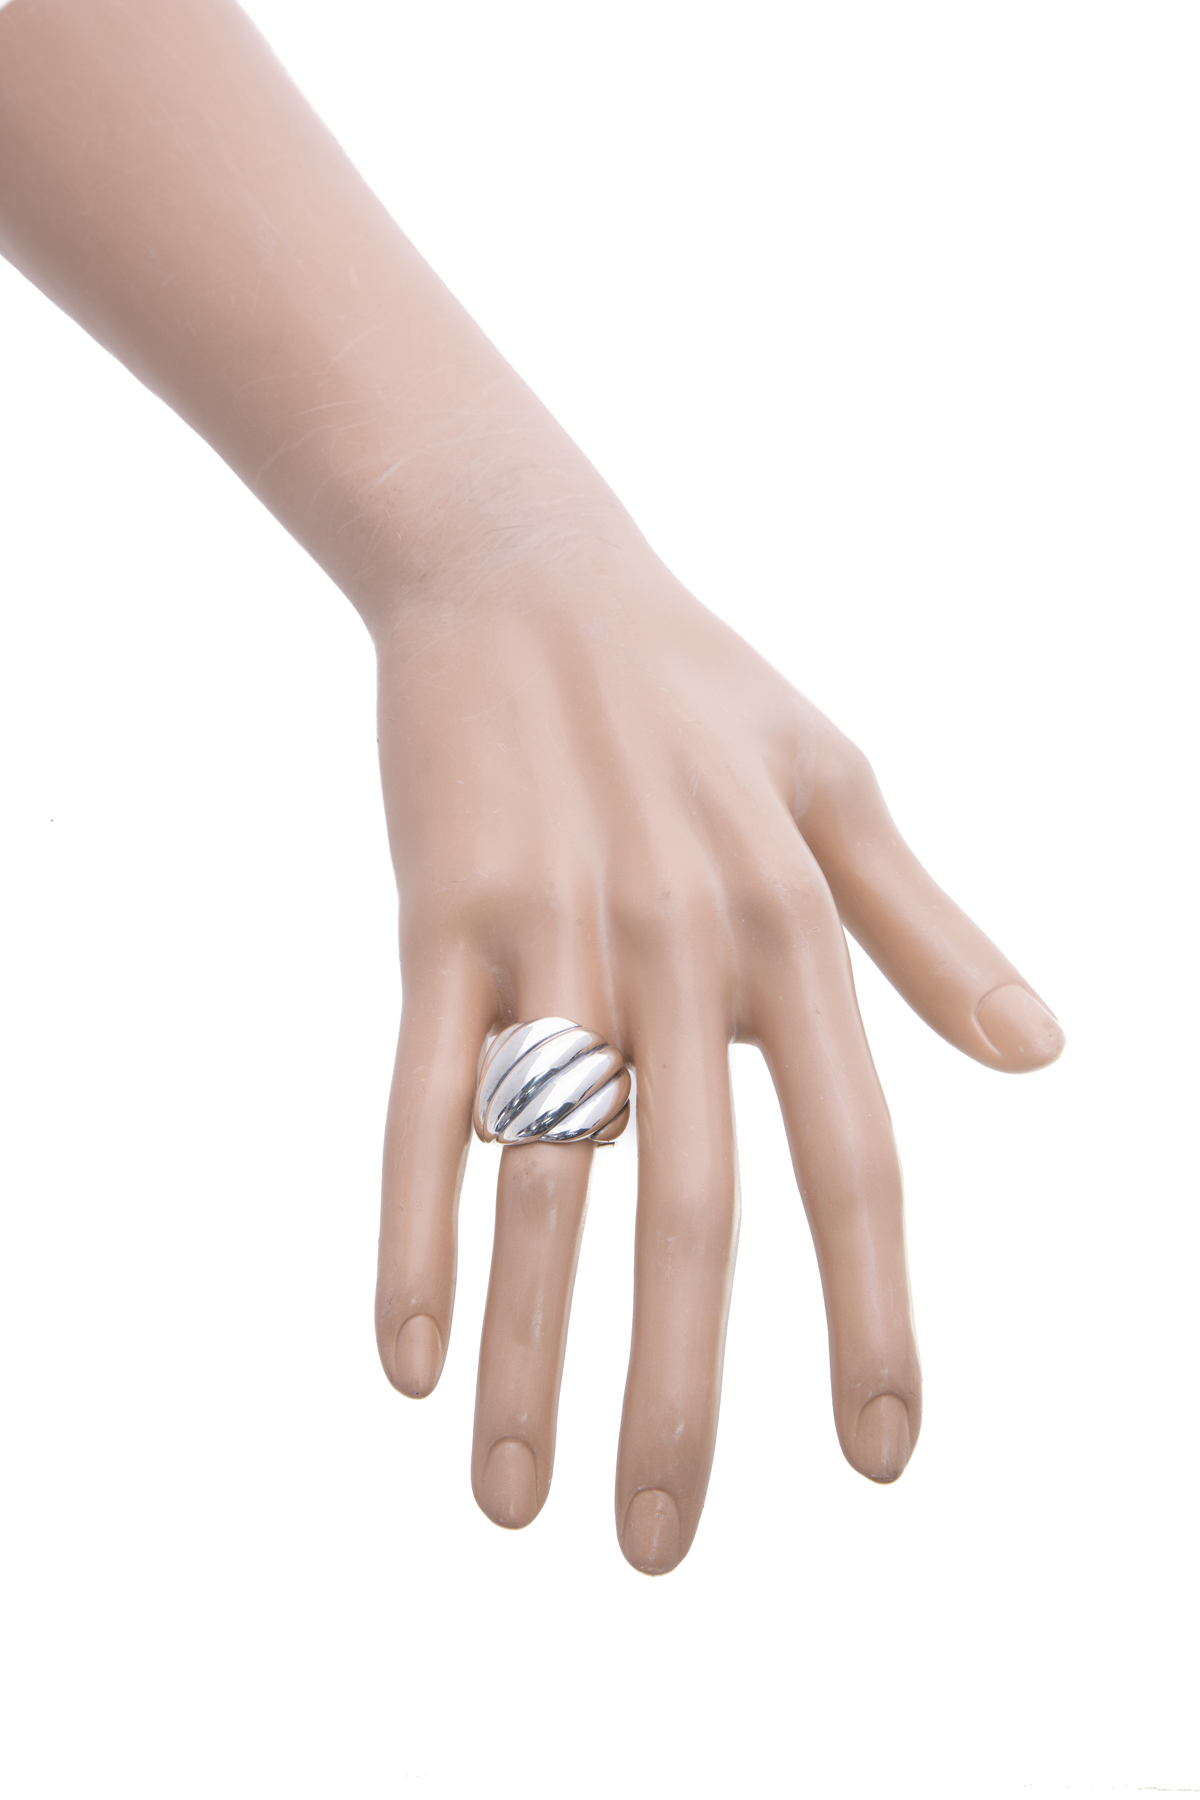 Cartier Love ring with 3 diamonds | Gray & Sons Jewelers